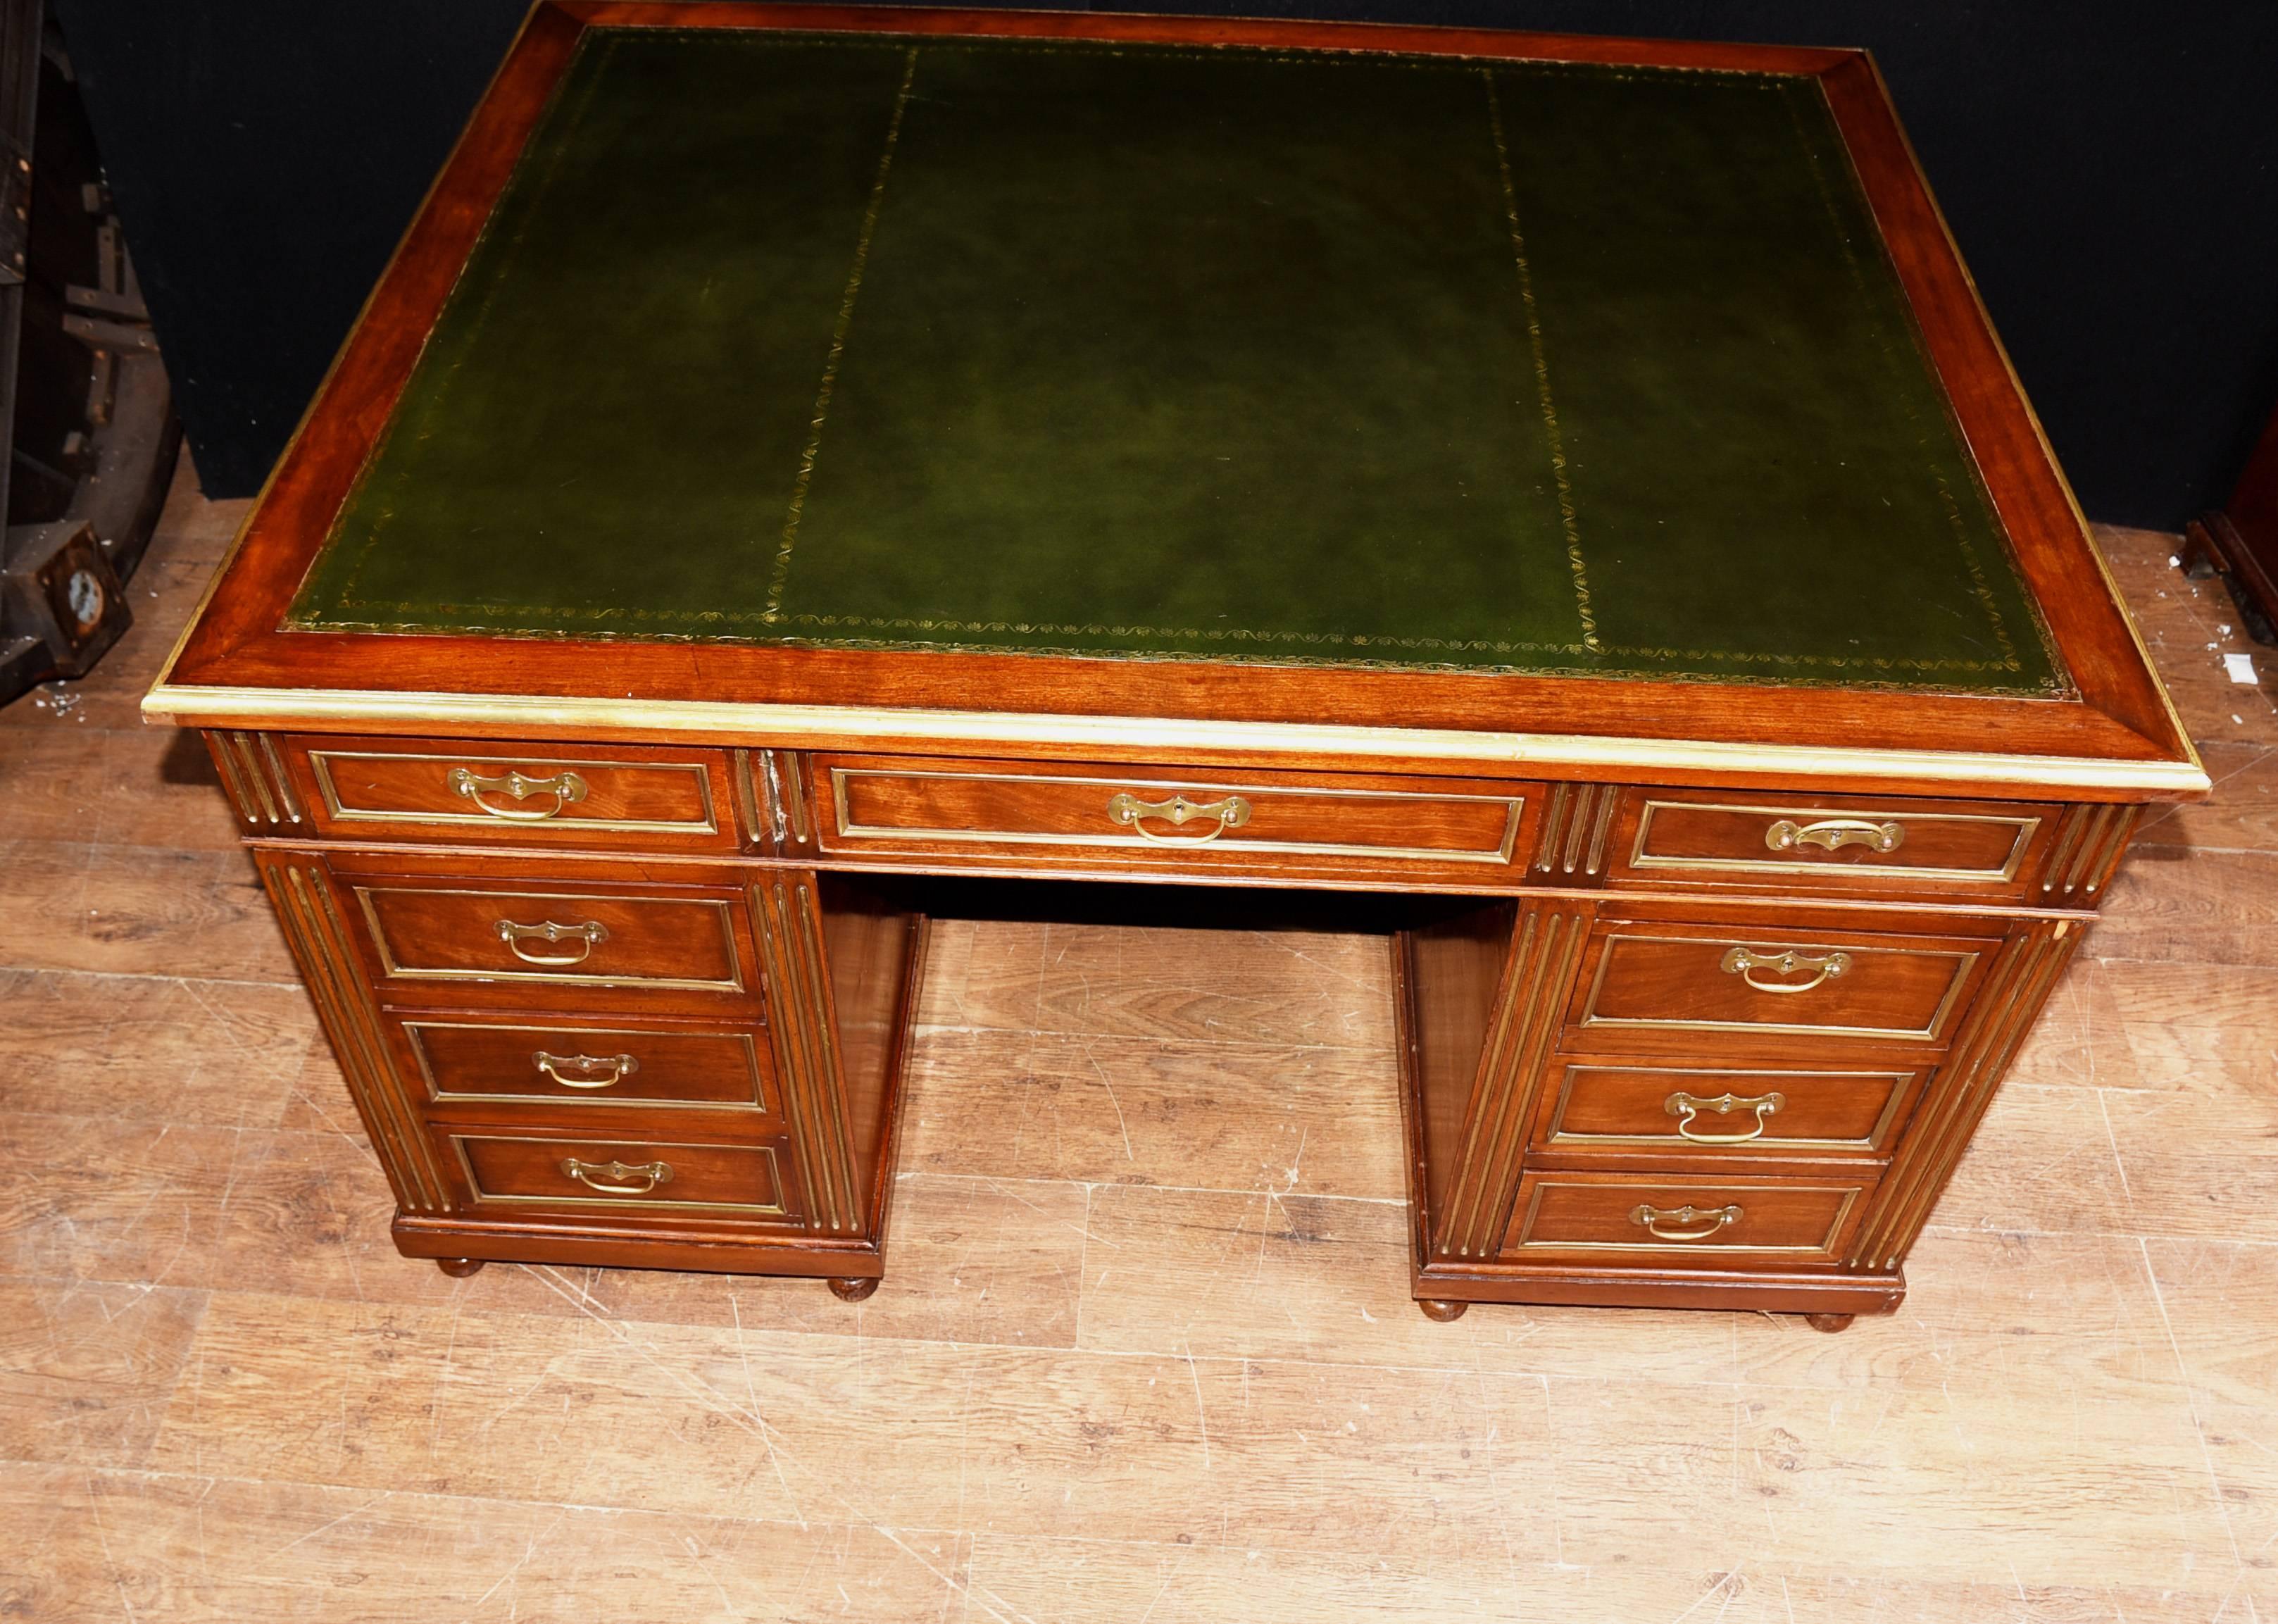 Gorgeous antique French Napoleon III desk in mahogany with brass channelling and fixtures
Great looking piece with lots of writing surface, great for a home office set up
Top has a green leather writing surface
Lots of storage with all the